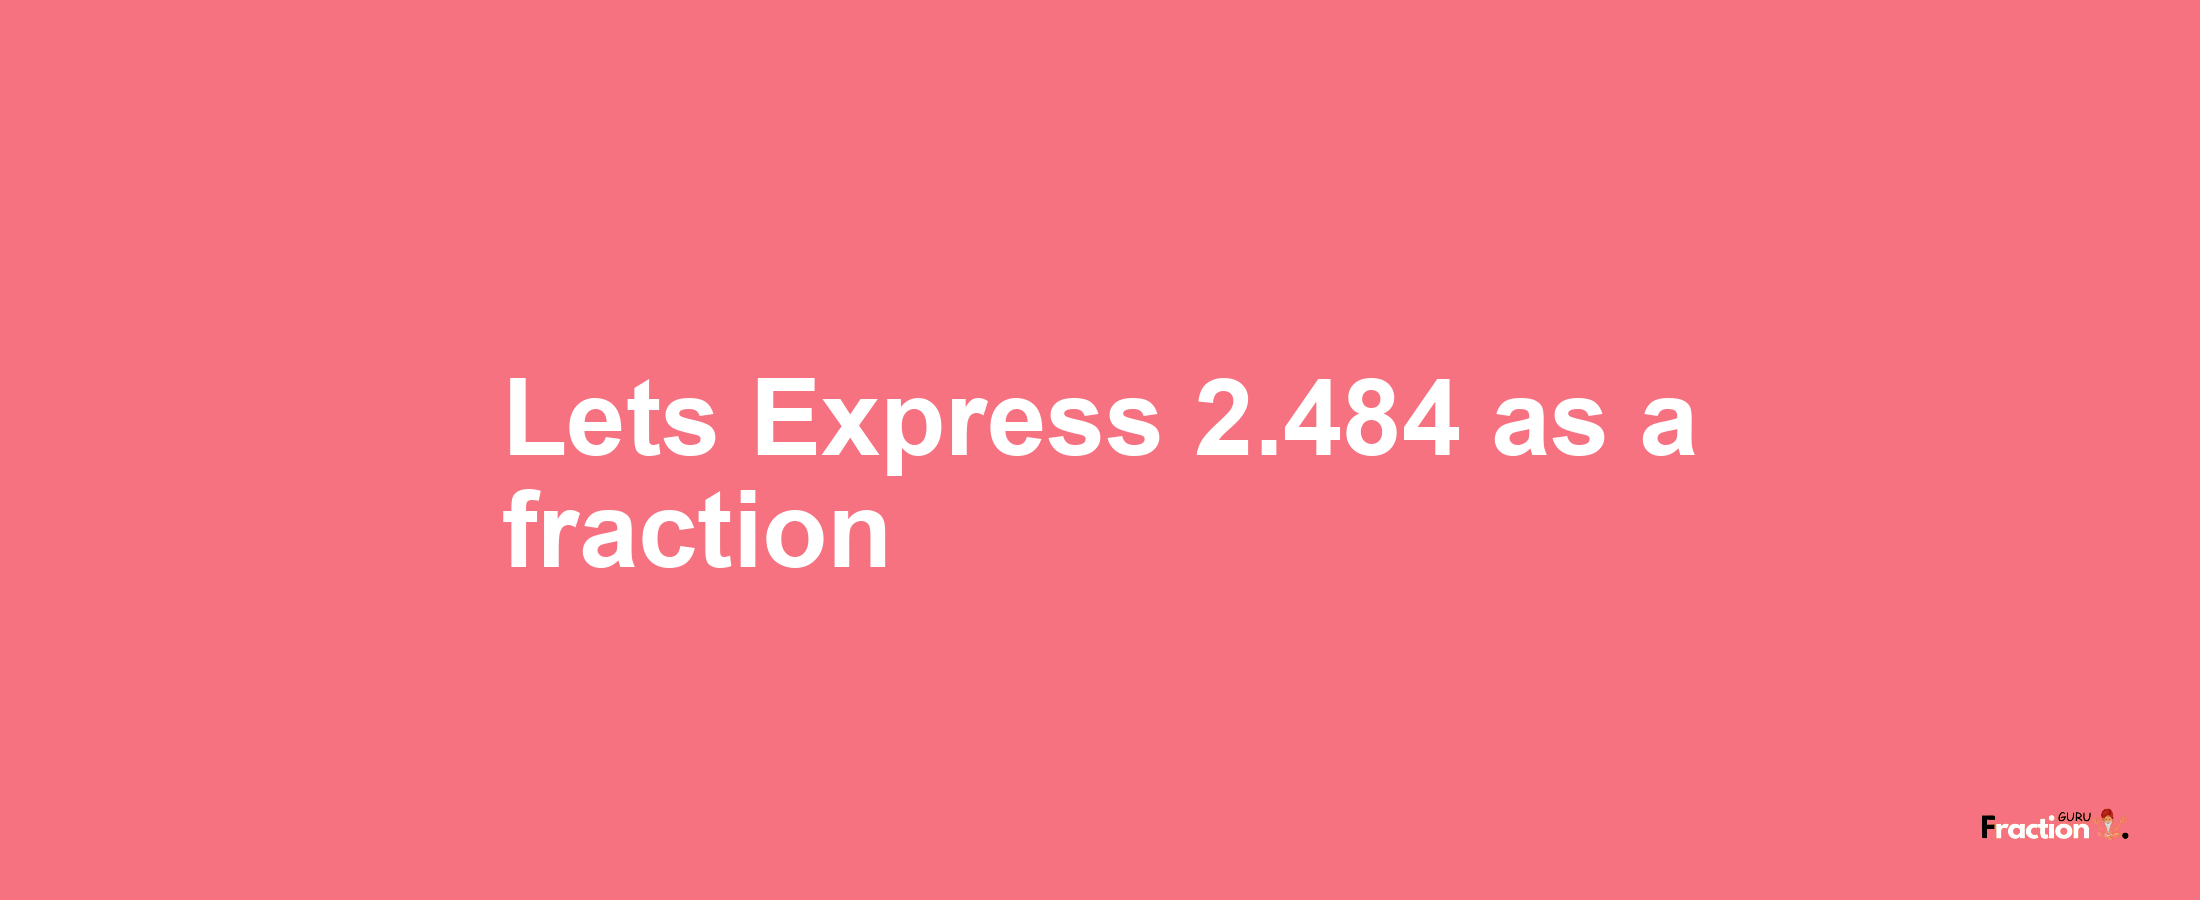 Lets Express 2.484 as afraction